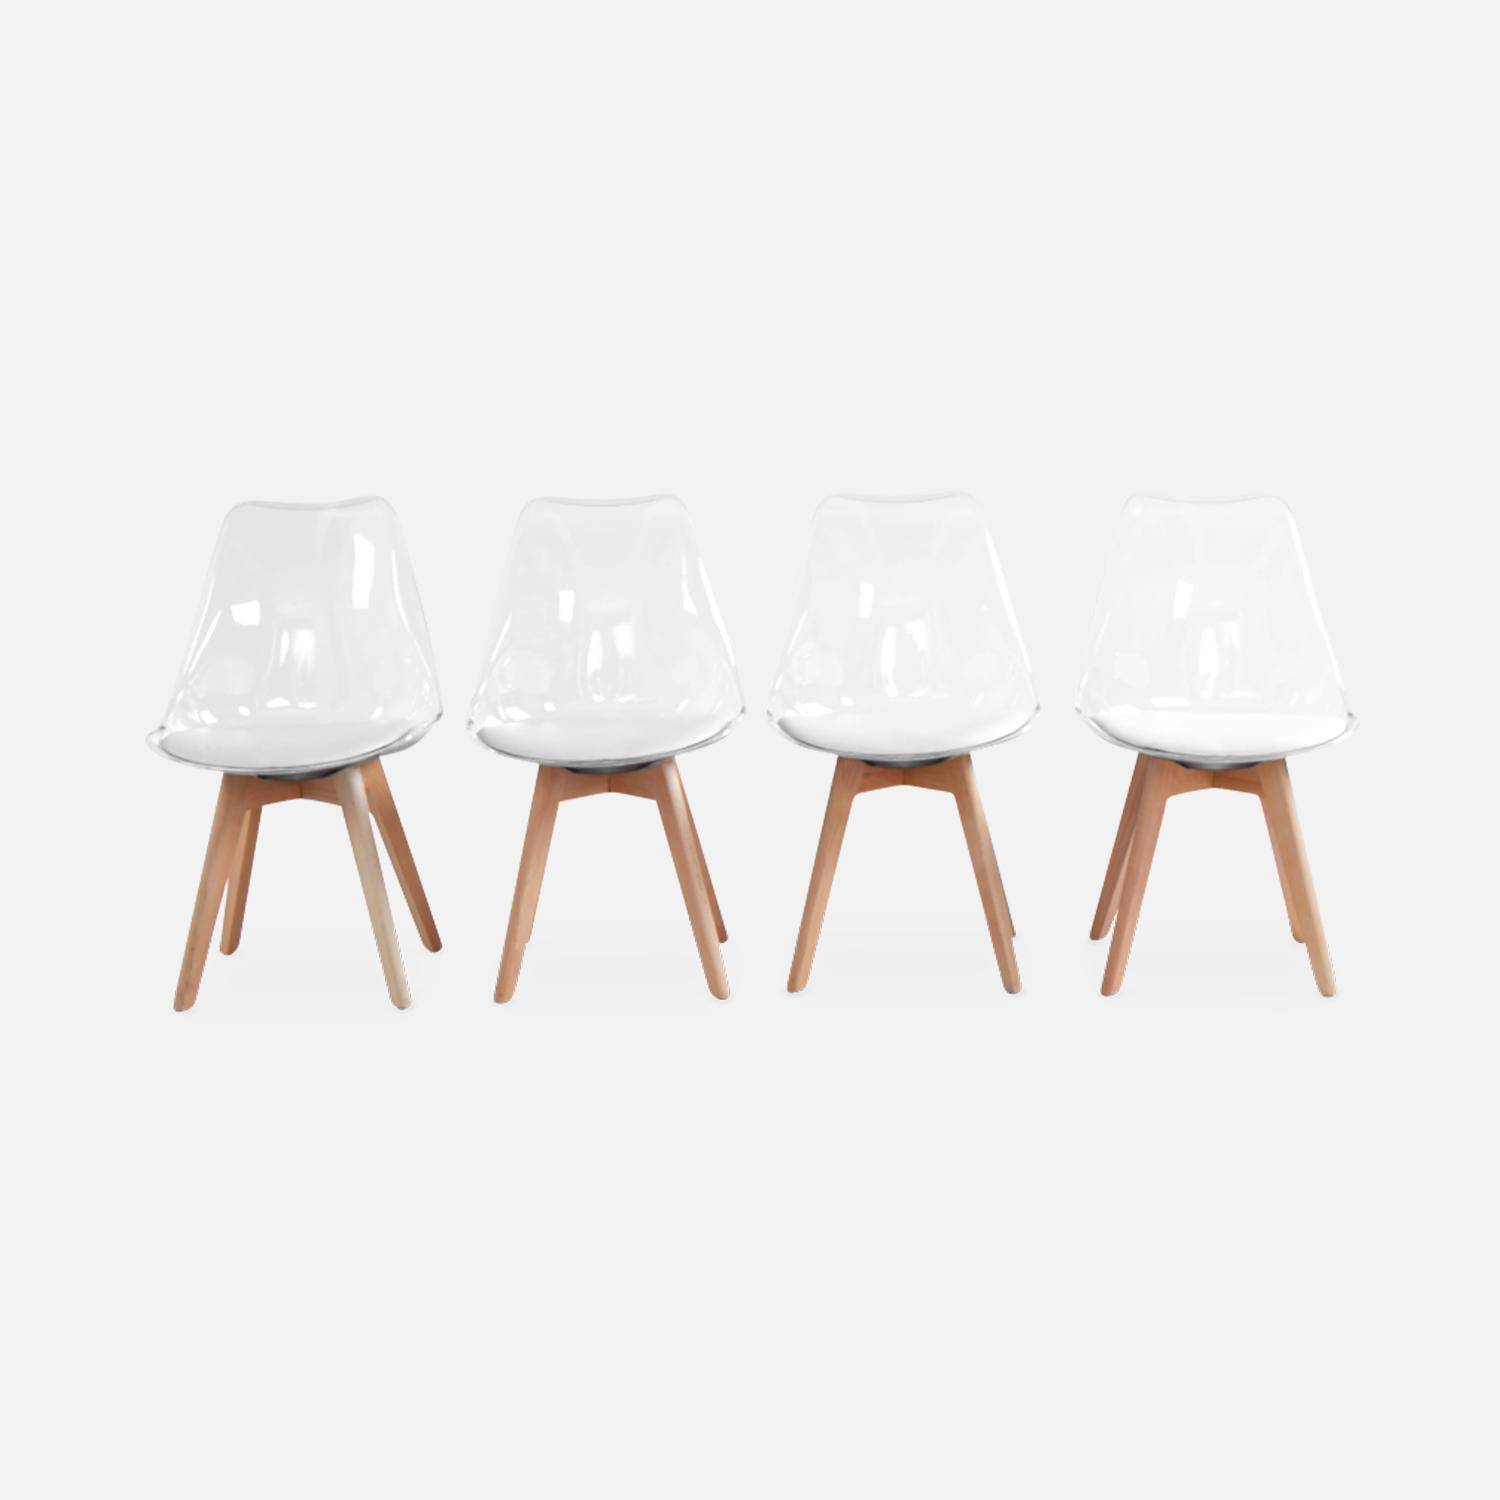 Set of 4 Scandi-style dining chairs with wooden legs, 100% leather cushions and acrylic shell - Lagertha - Clear and White Photo4